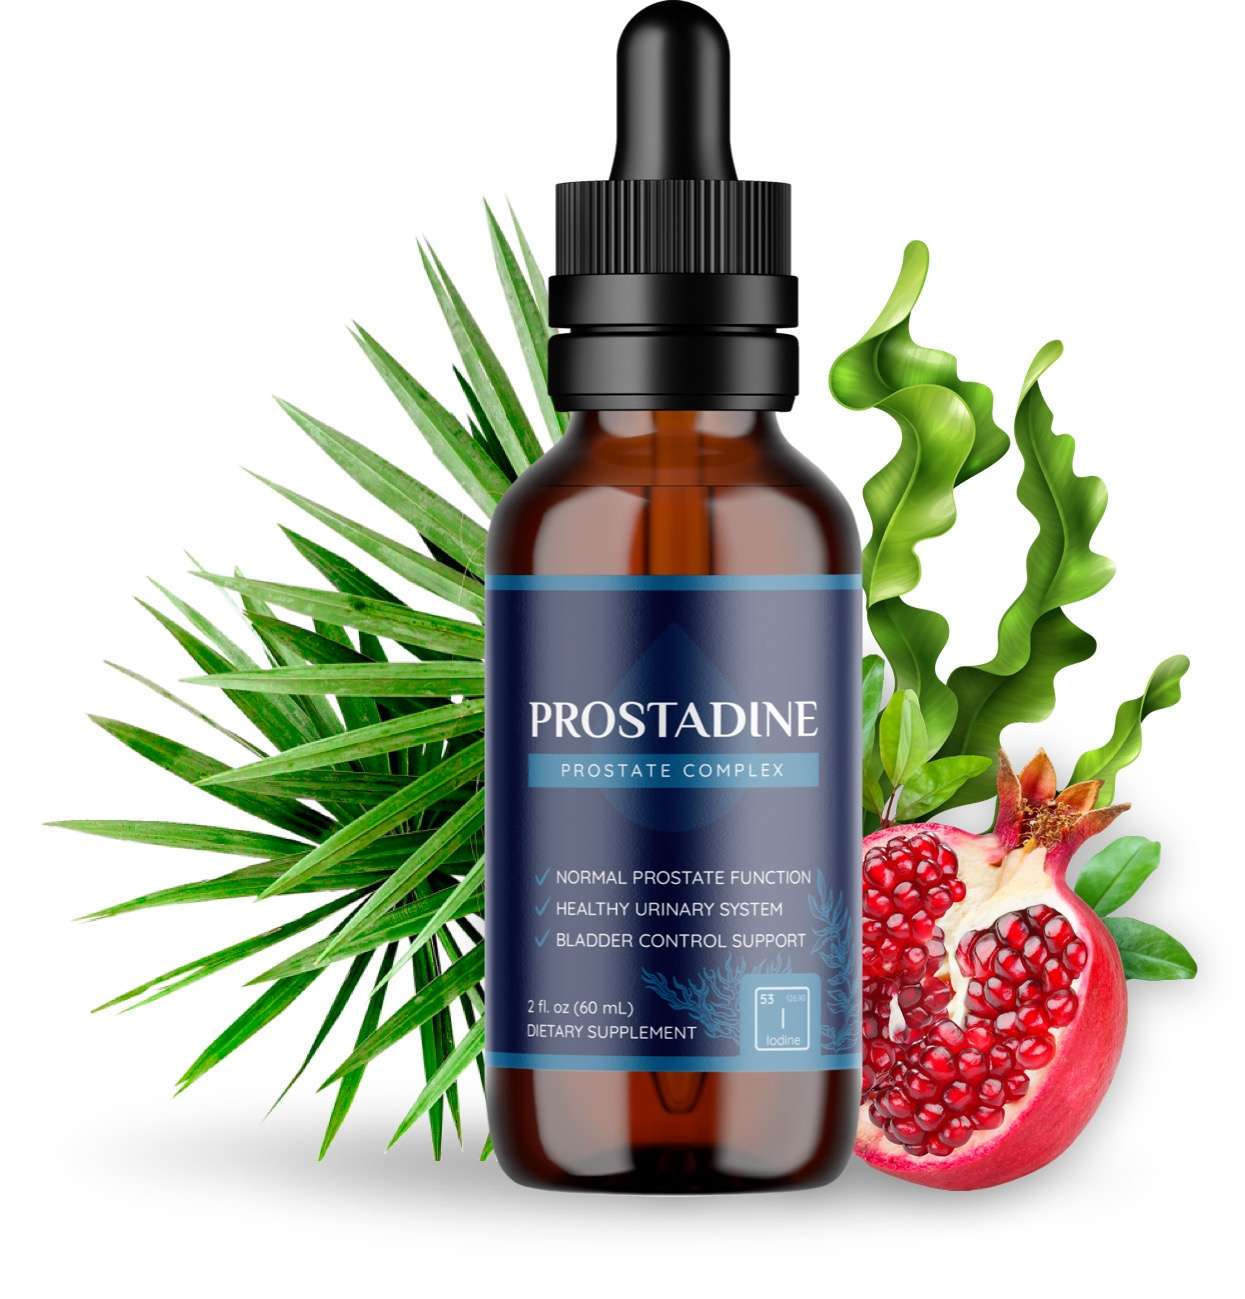 Prostadine Product Review